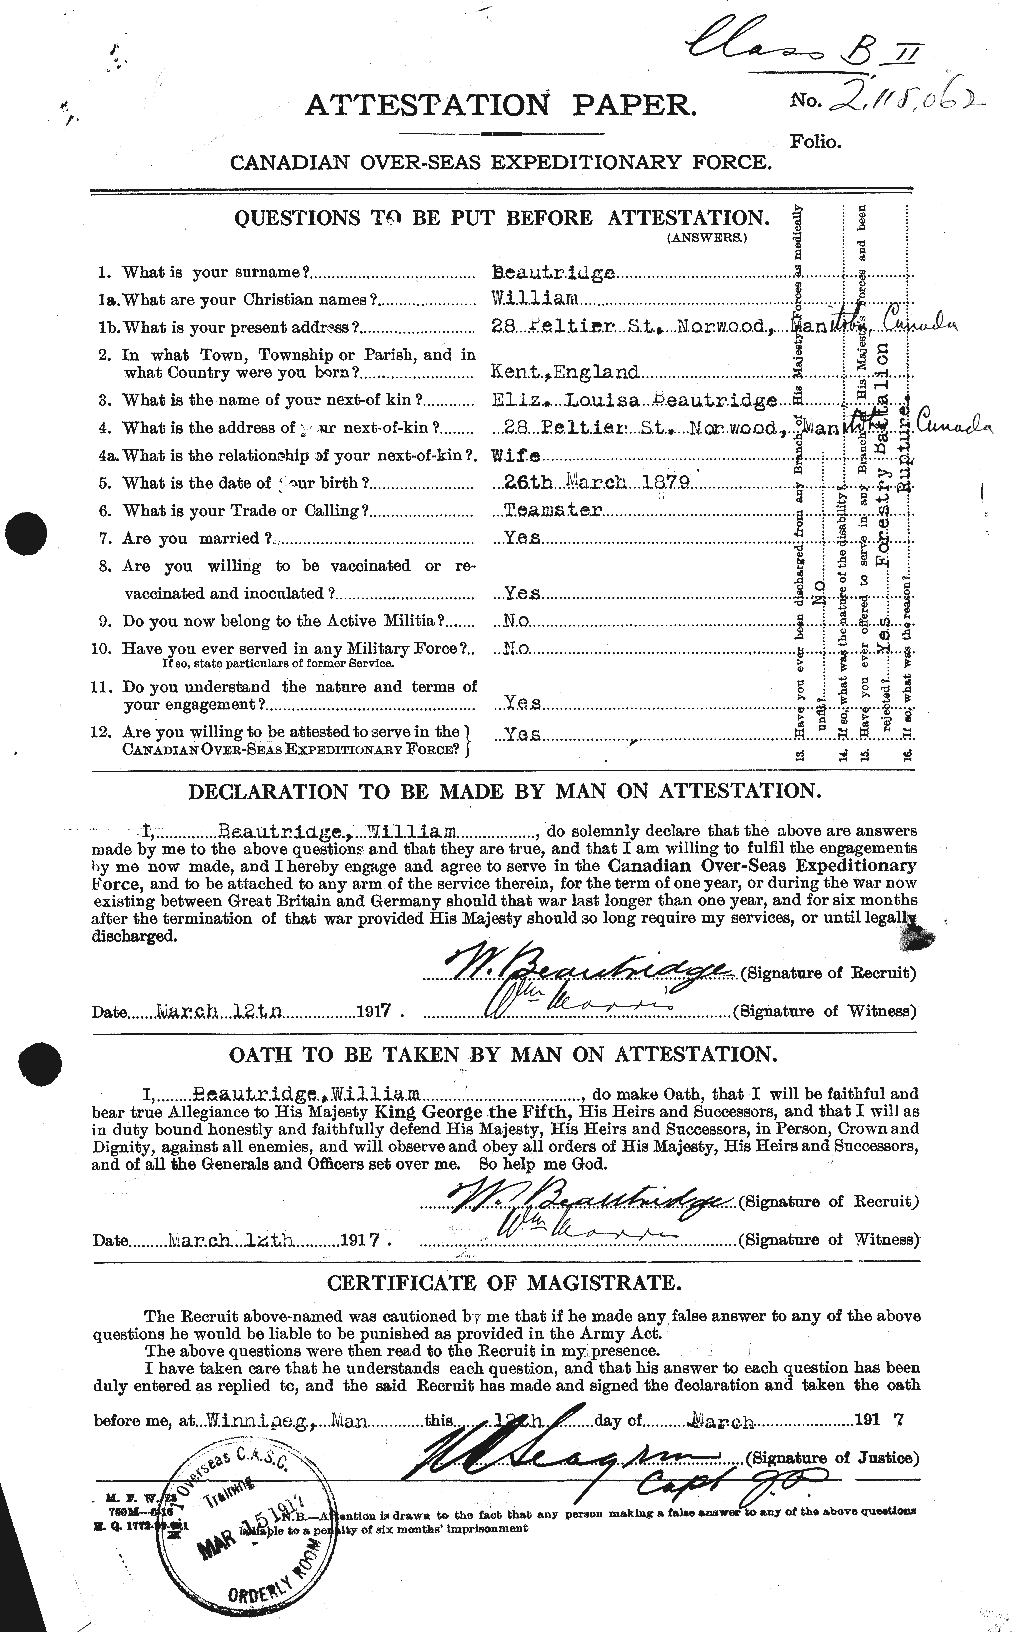 Personnel Records of the First World War - CEF 231873a